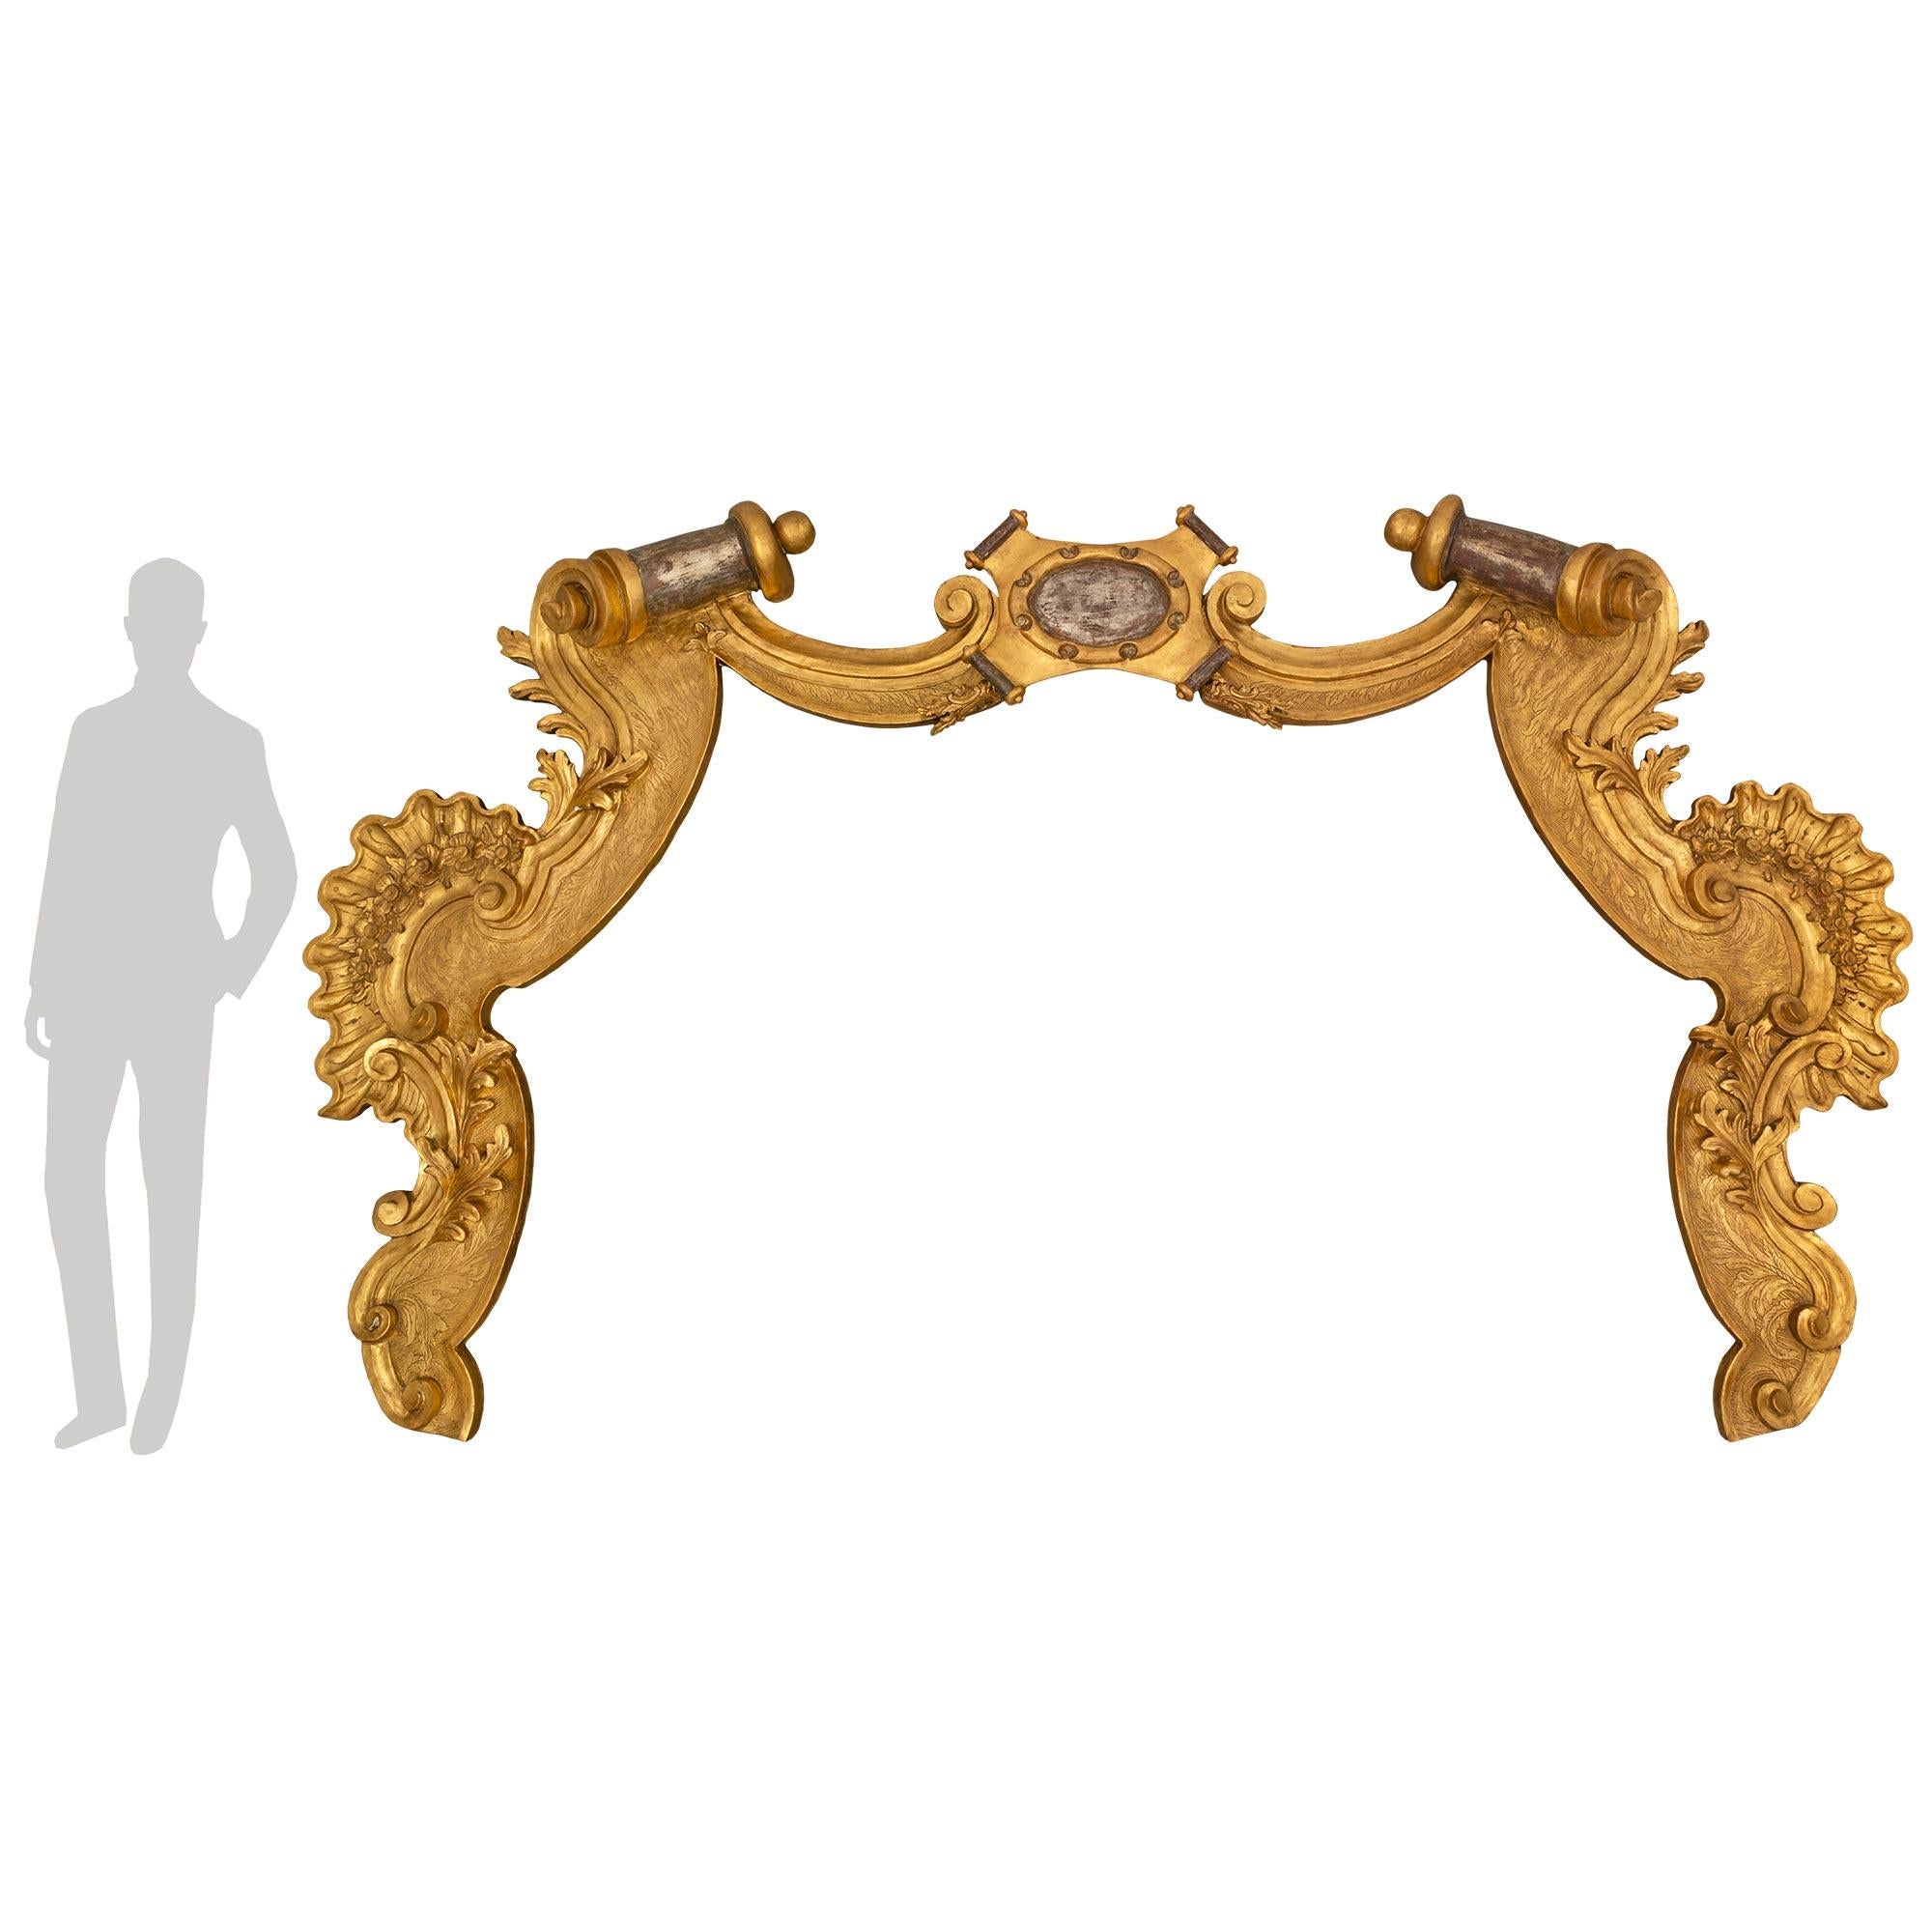 A majestic and large scale Italian 18th century giltwood and mecca architectural element. The unique and extremely decorative carved giltwood element displays beautiful richly carved scrolled foliate designs, charming flowers and finely etched